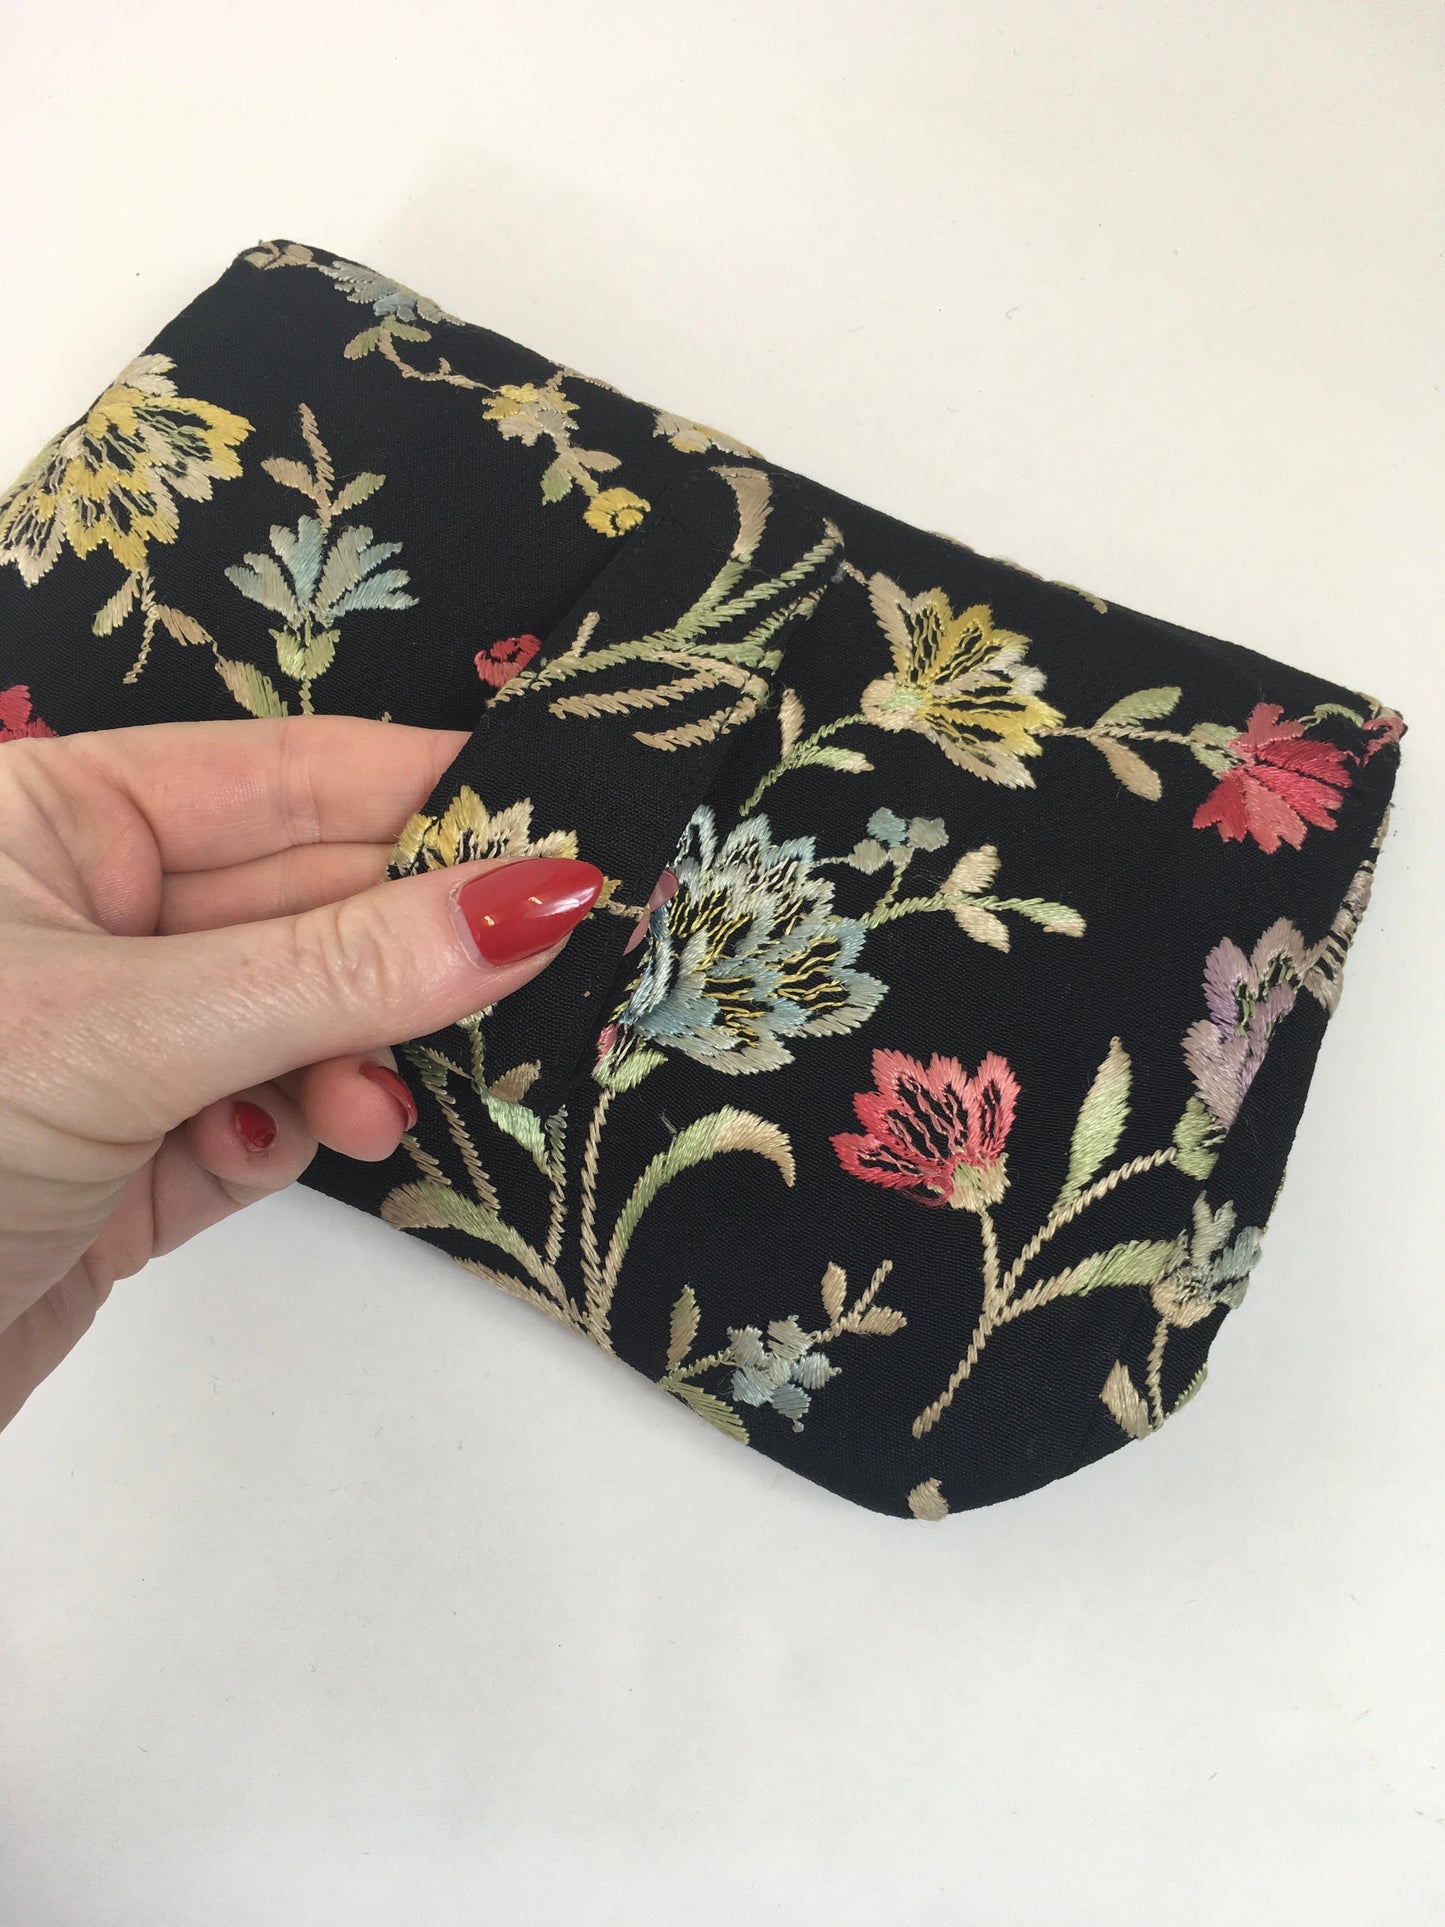 Original 1930's Exquisite Embroidered Crepe Clutch Handbag - In Black with Lilacs, Pinks, Pale Blues and Green